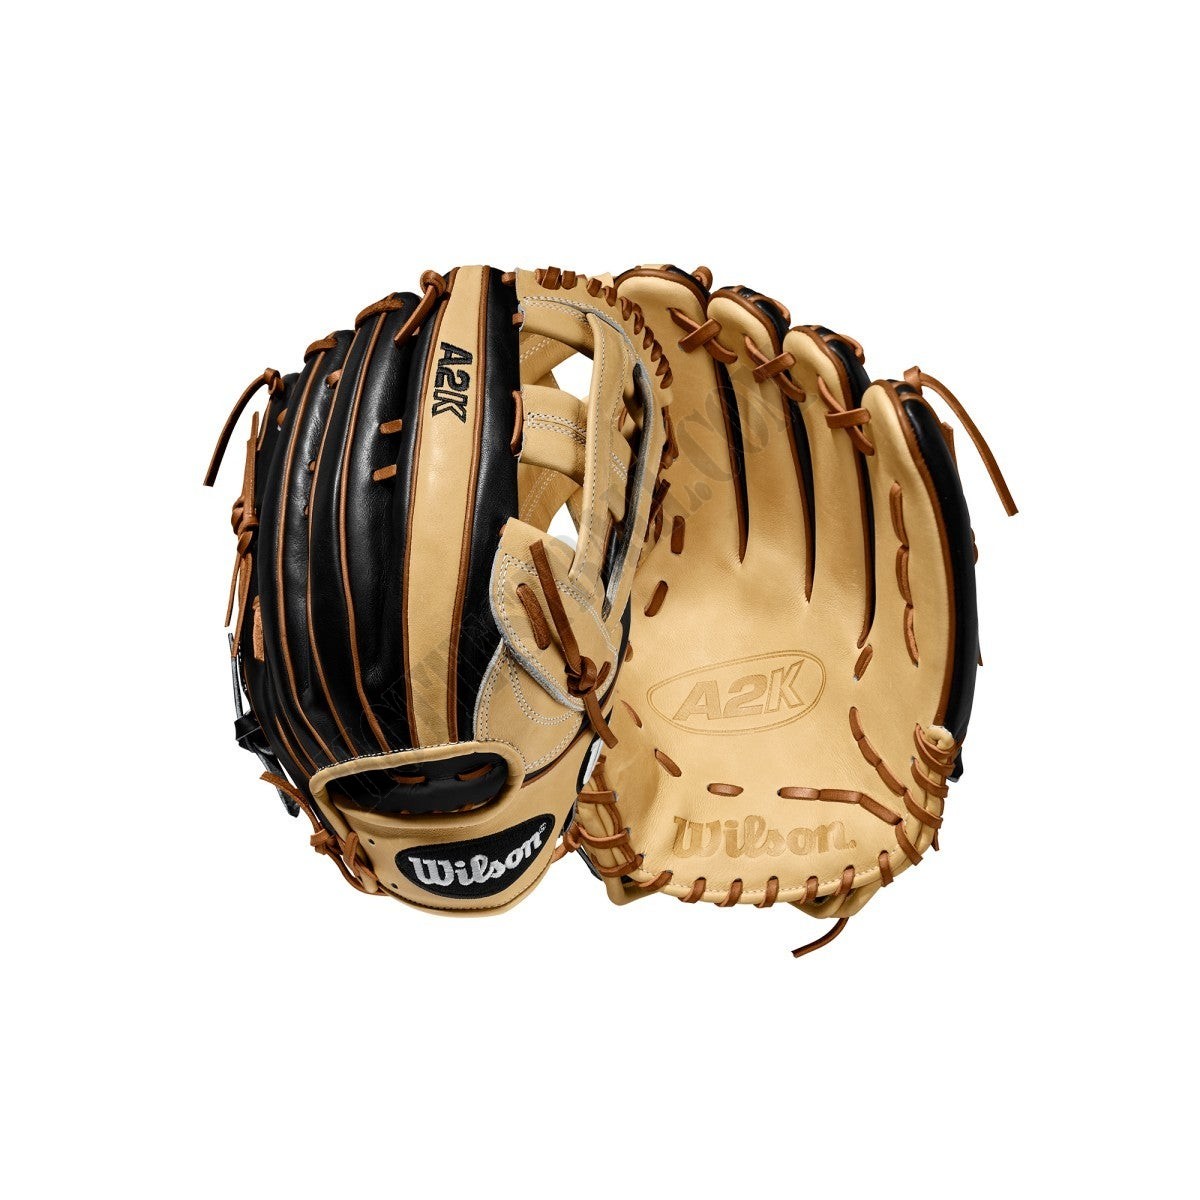 2020 A2K 1799 12.75" Outfield Baseball Glove ● Wilson Promotions - -0